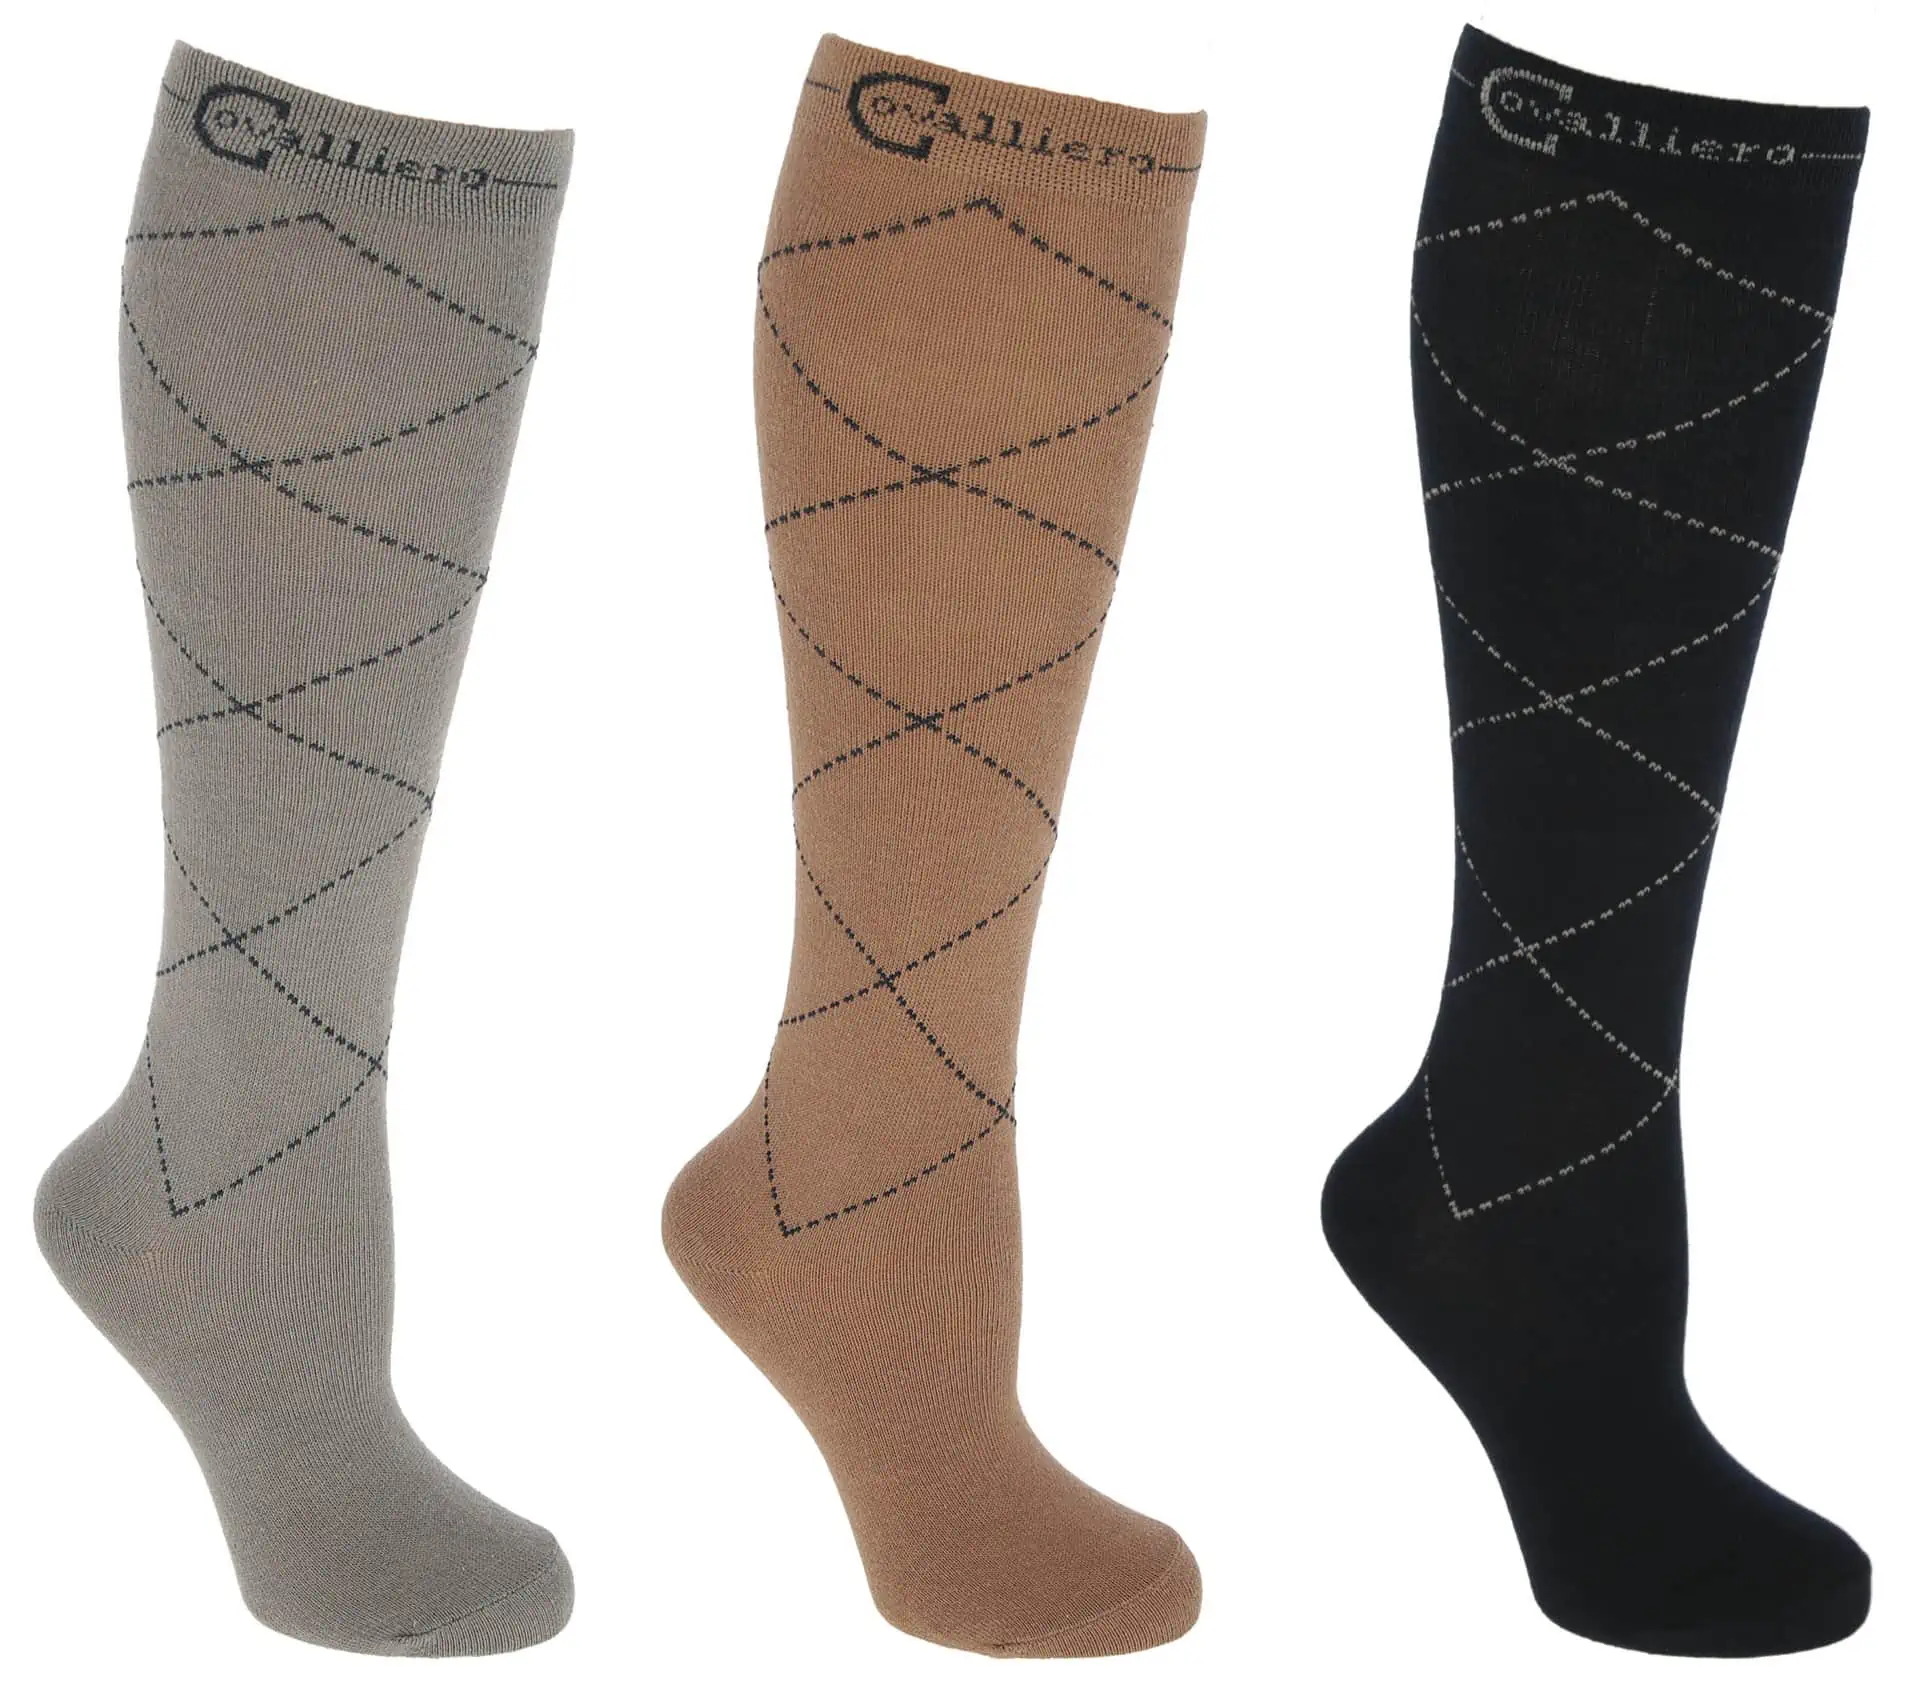 Riding Socks Check, Pack of 3 size 37-39